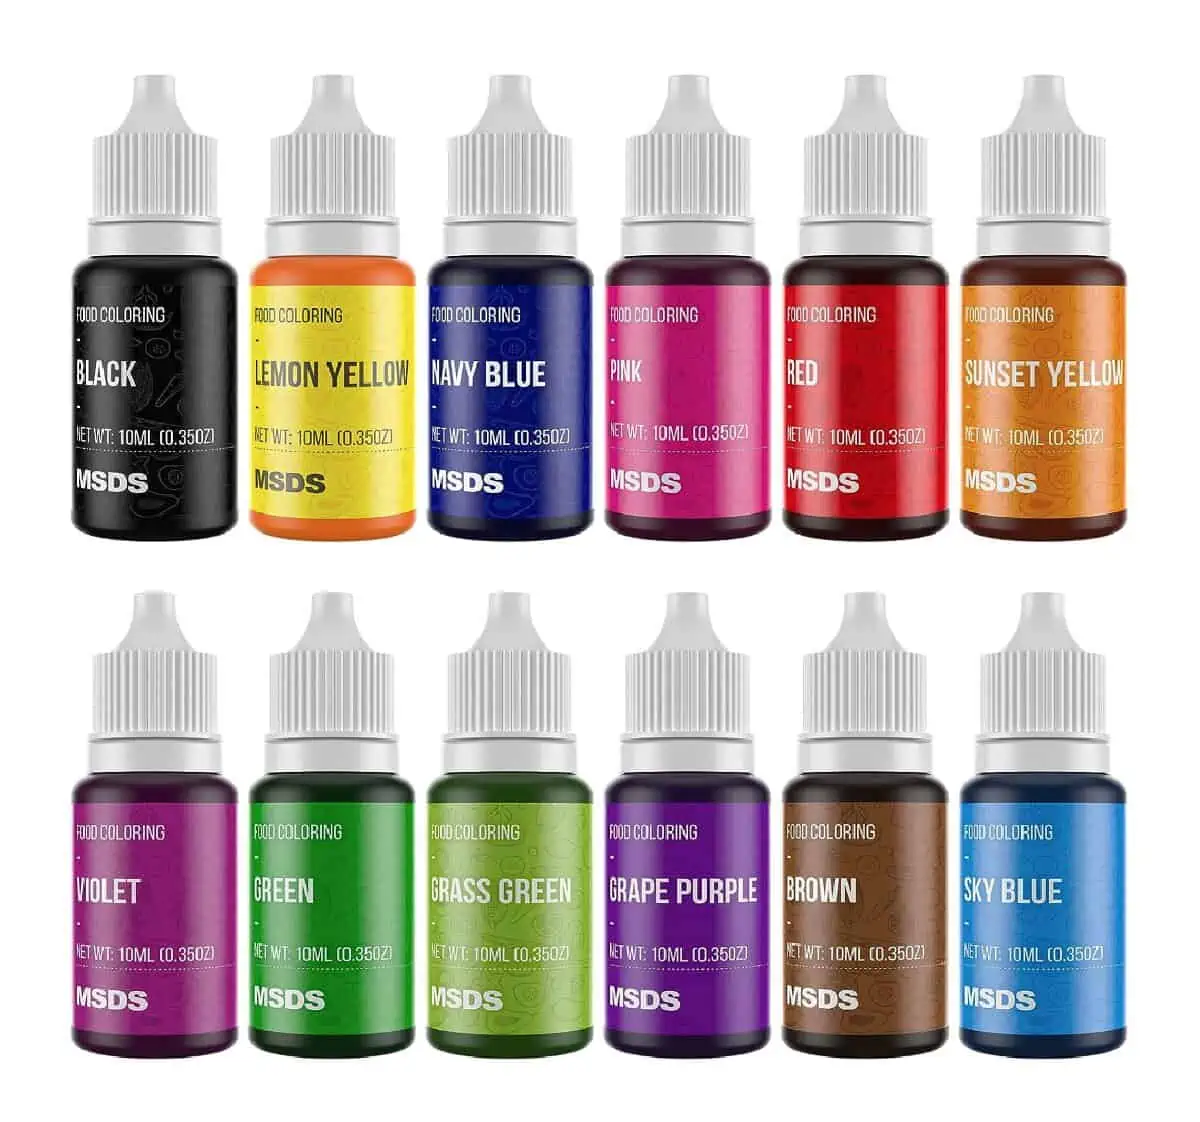 Samples of 12 small drop bottle of Value Talks food coloring shown in two rows of six on a white background.